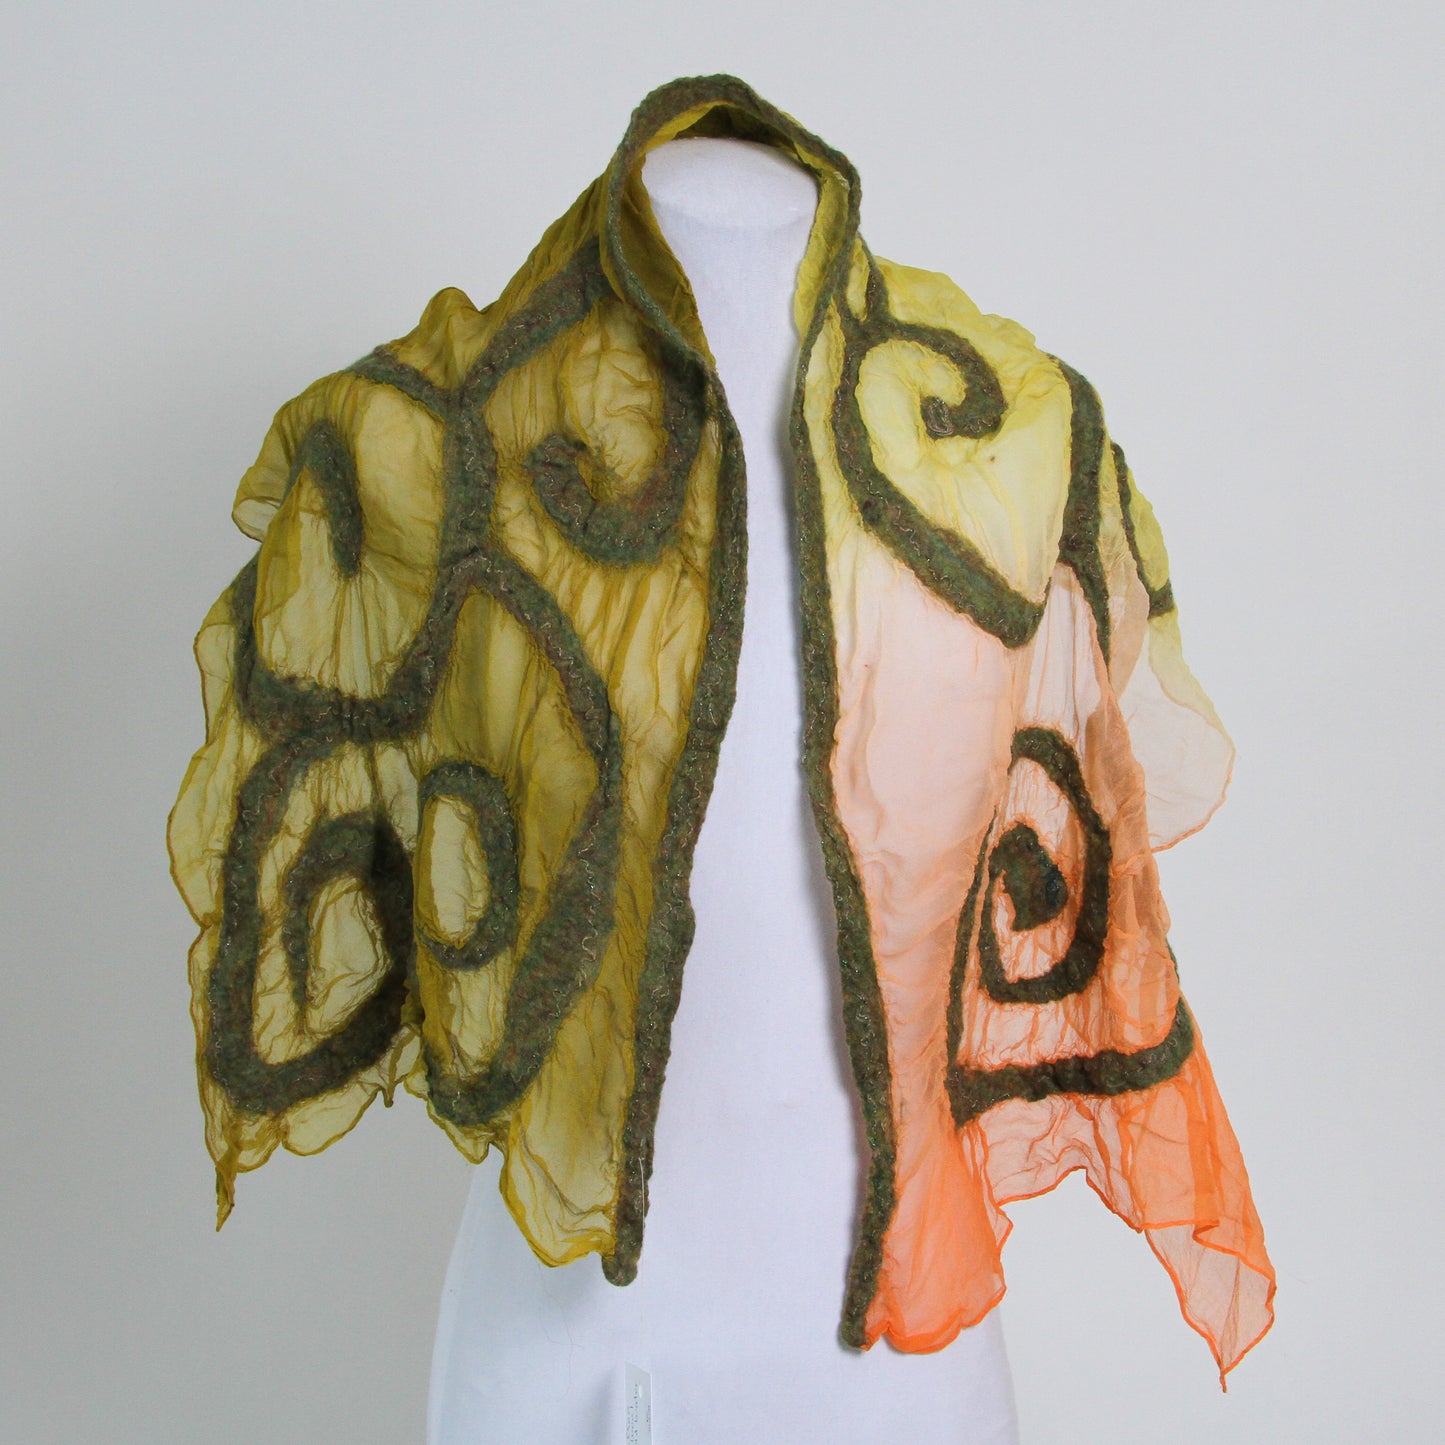 Green and orange gradient scarf with wool swirl detail